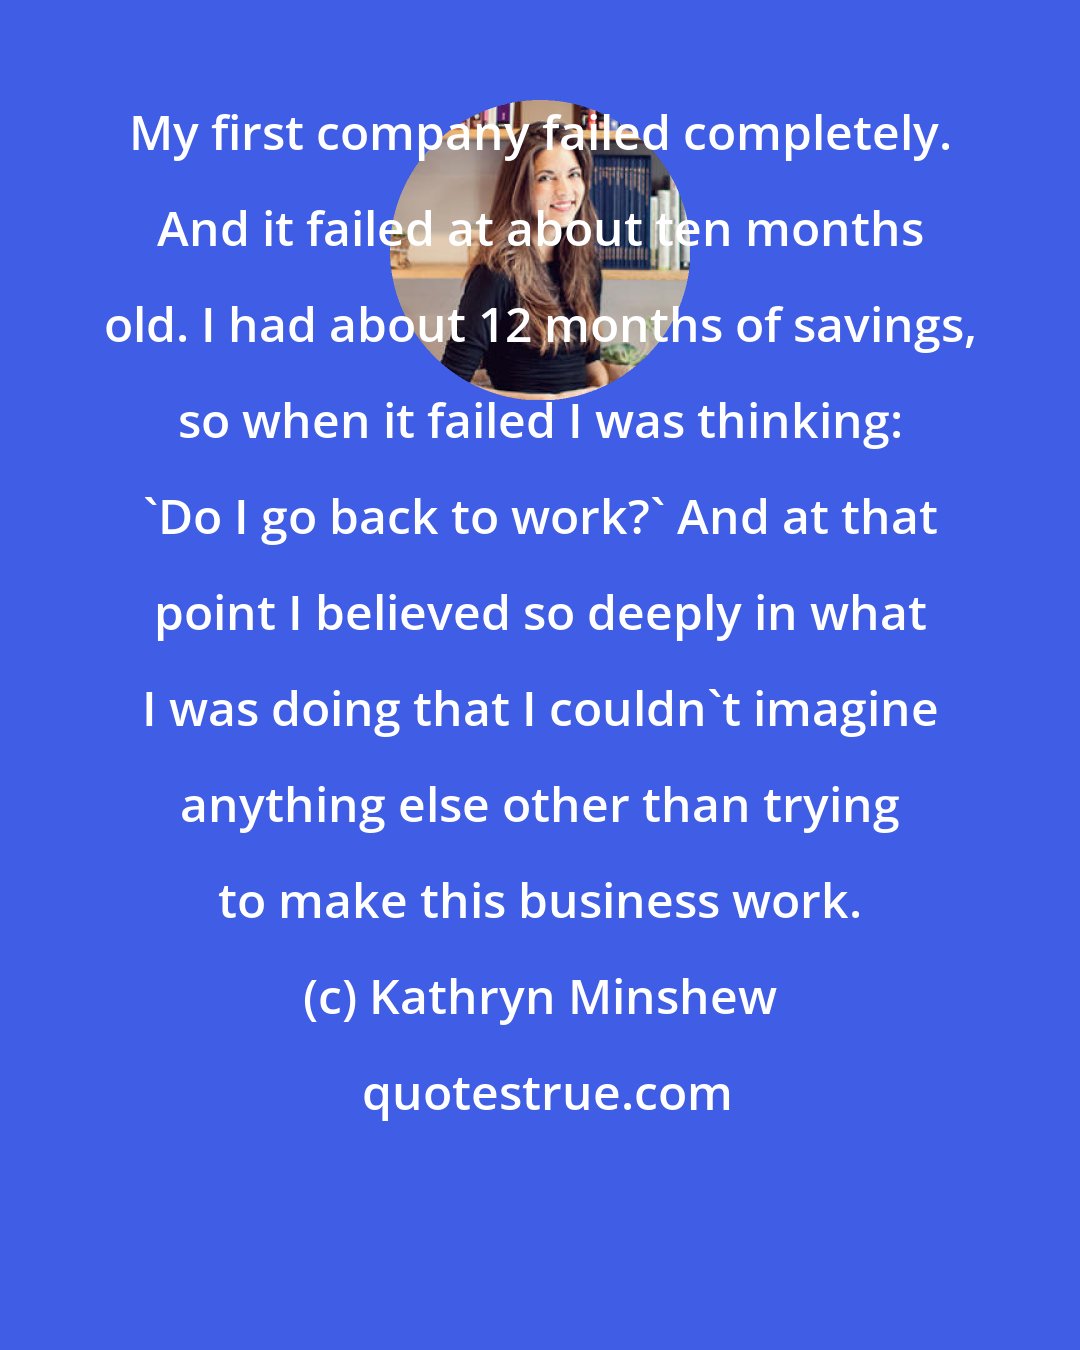 Kathryn Minshew: My first company failed completely. And it failed at about ten months old. I had about 12 months of savings, so when it failed I was thinking: 'Do I go back to work?' And at that point I believed so deeply in what I was doing that I couldn't imagine anything else other than trying to make this business work.